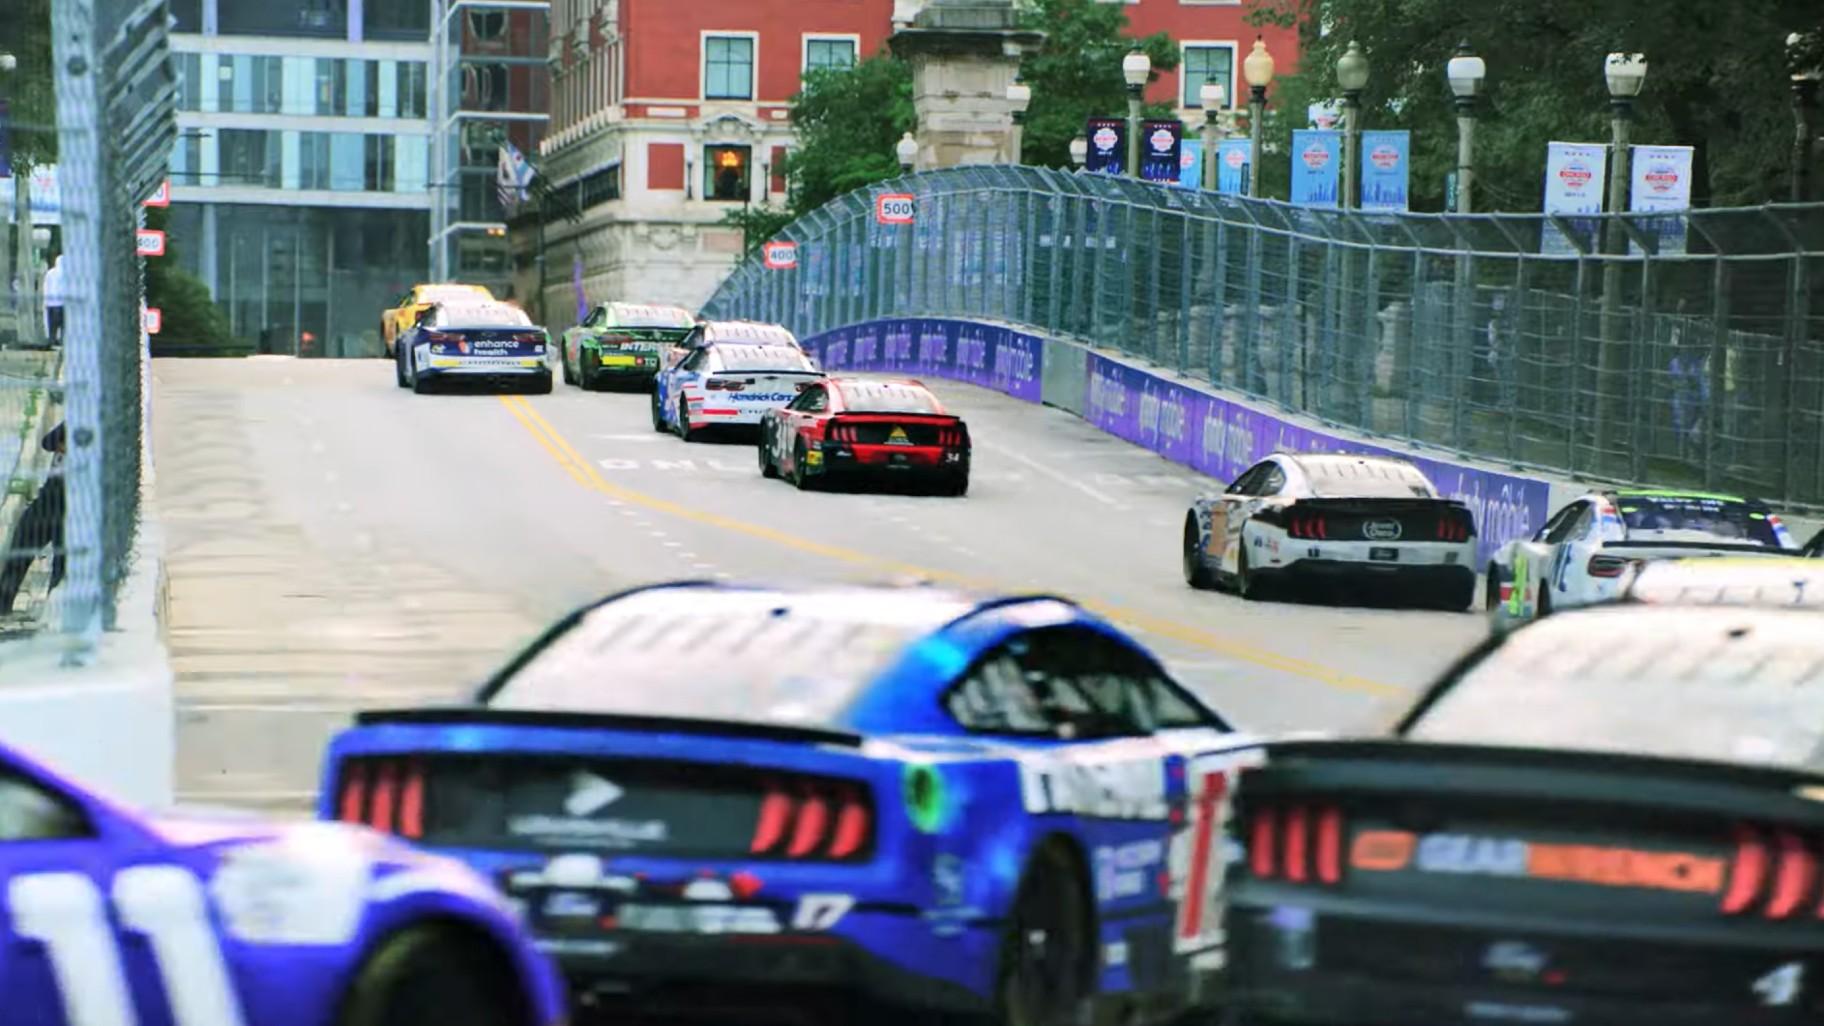 A still from a promotional video for the NASCAR Chicago Street Race. (Courtesy of NASCAR)